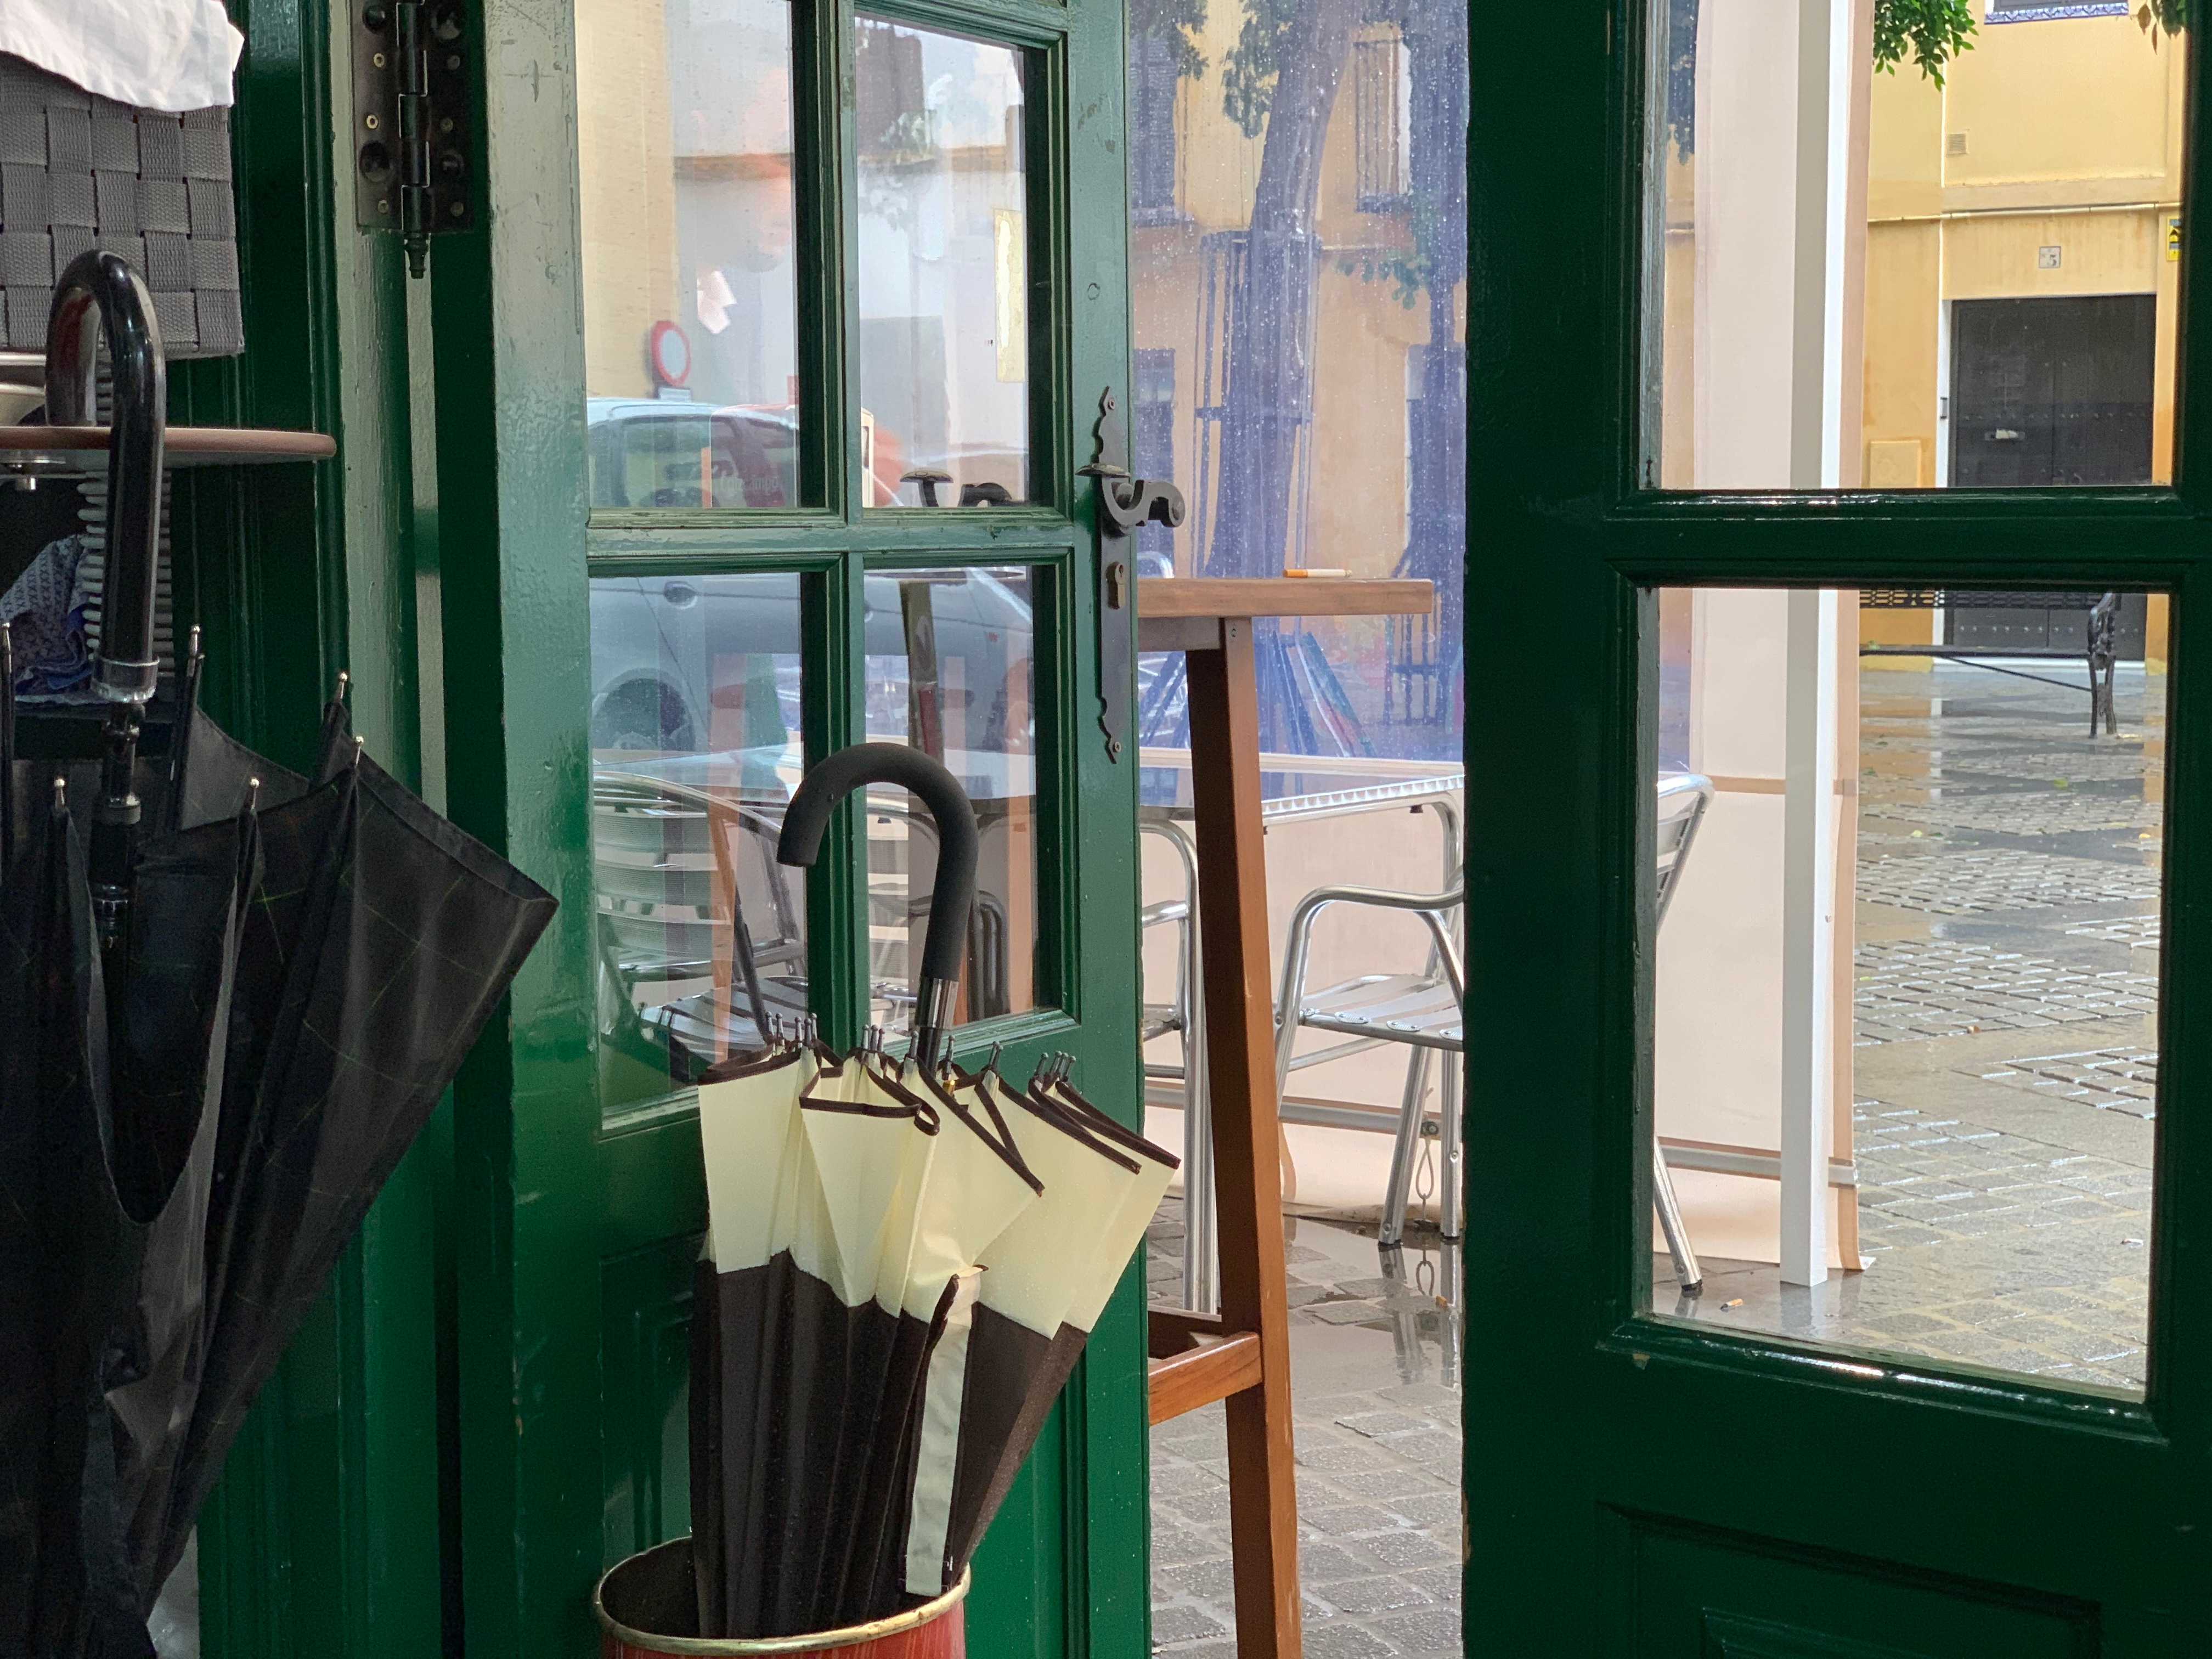 Looking out a green-framed door propped open by an umbrella holder filled with one umbrella on a rainy day. The view outside shows the cafe's outdoor seating on rainy cobblestones